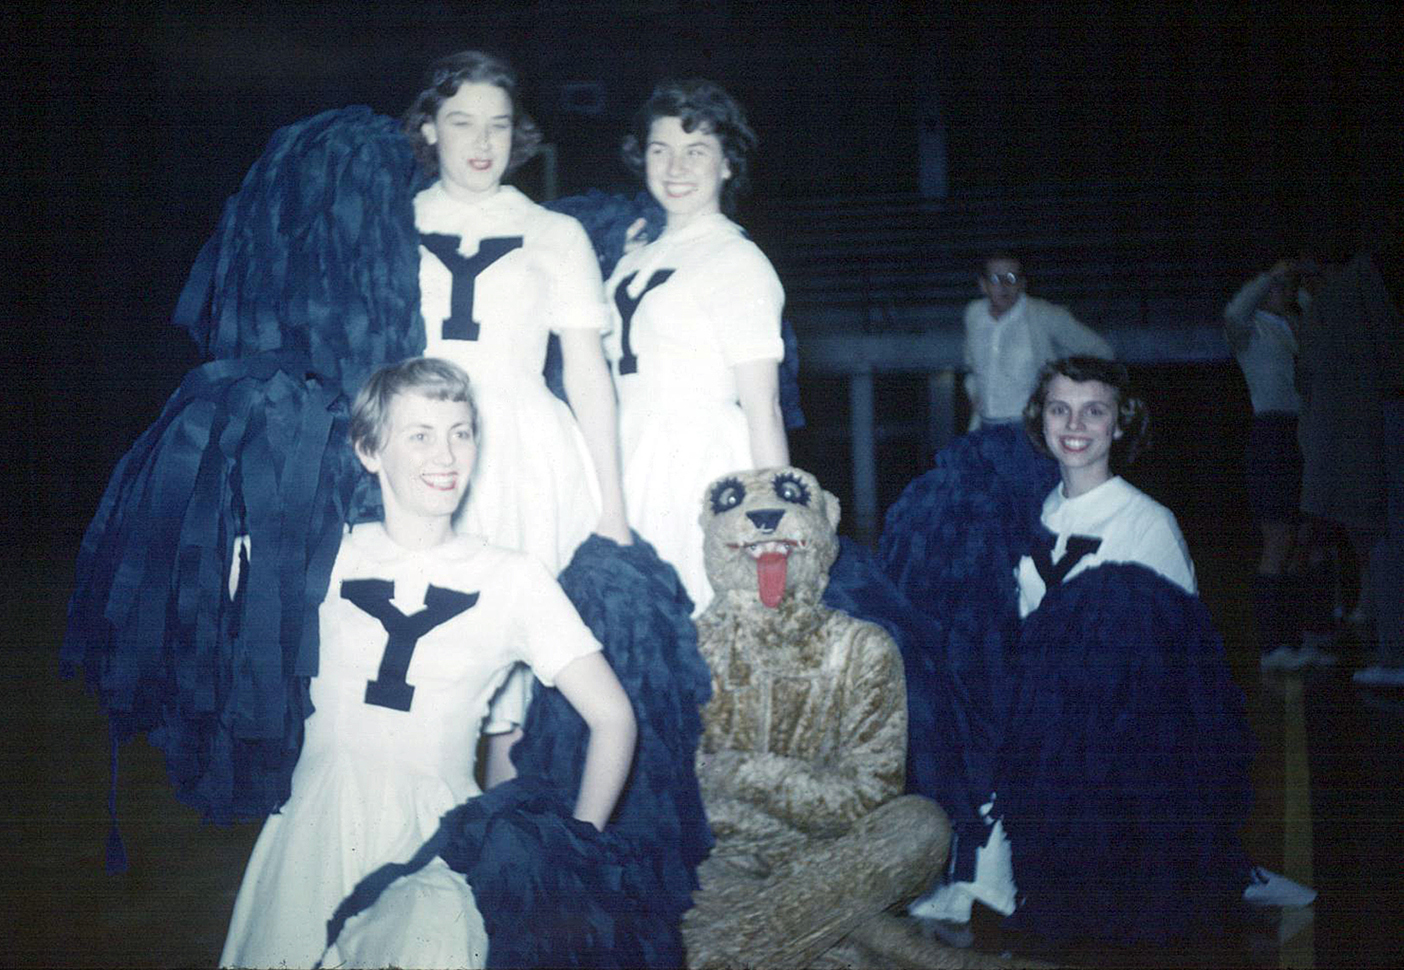 Cosmo poses with three BYU cheerleaders holding pom-poms.